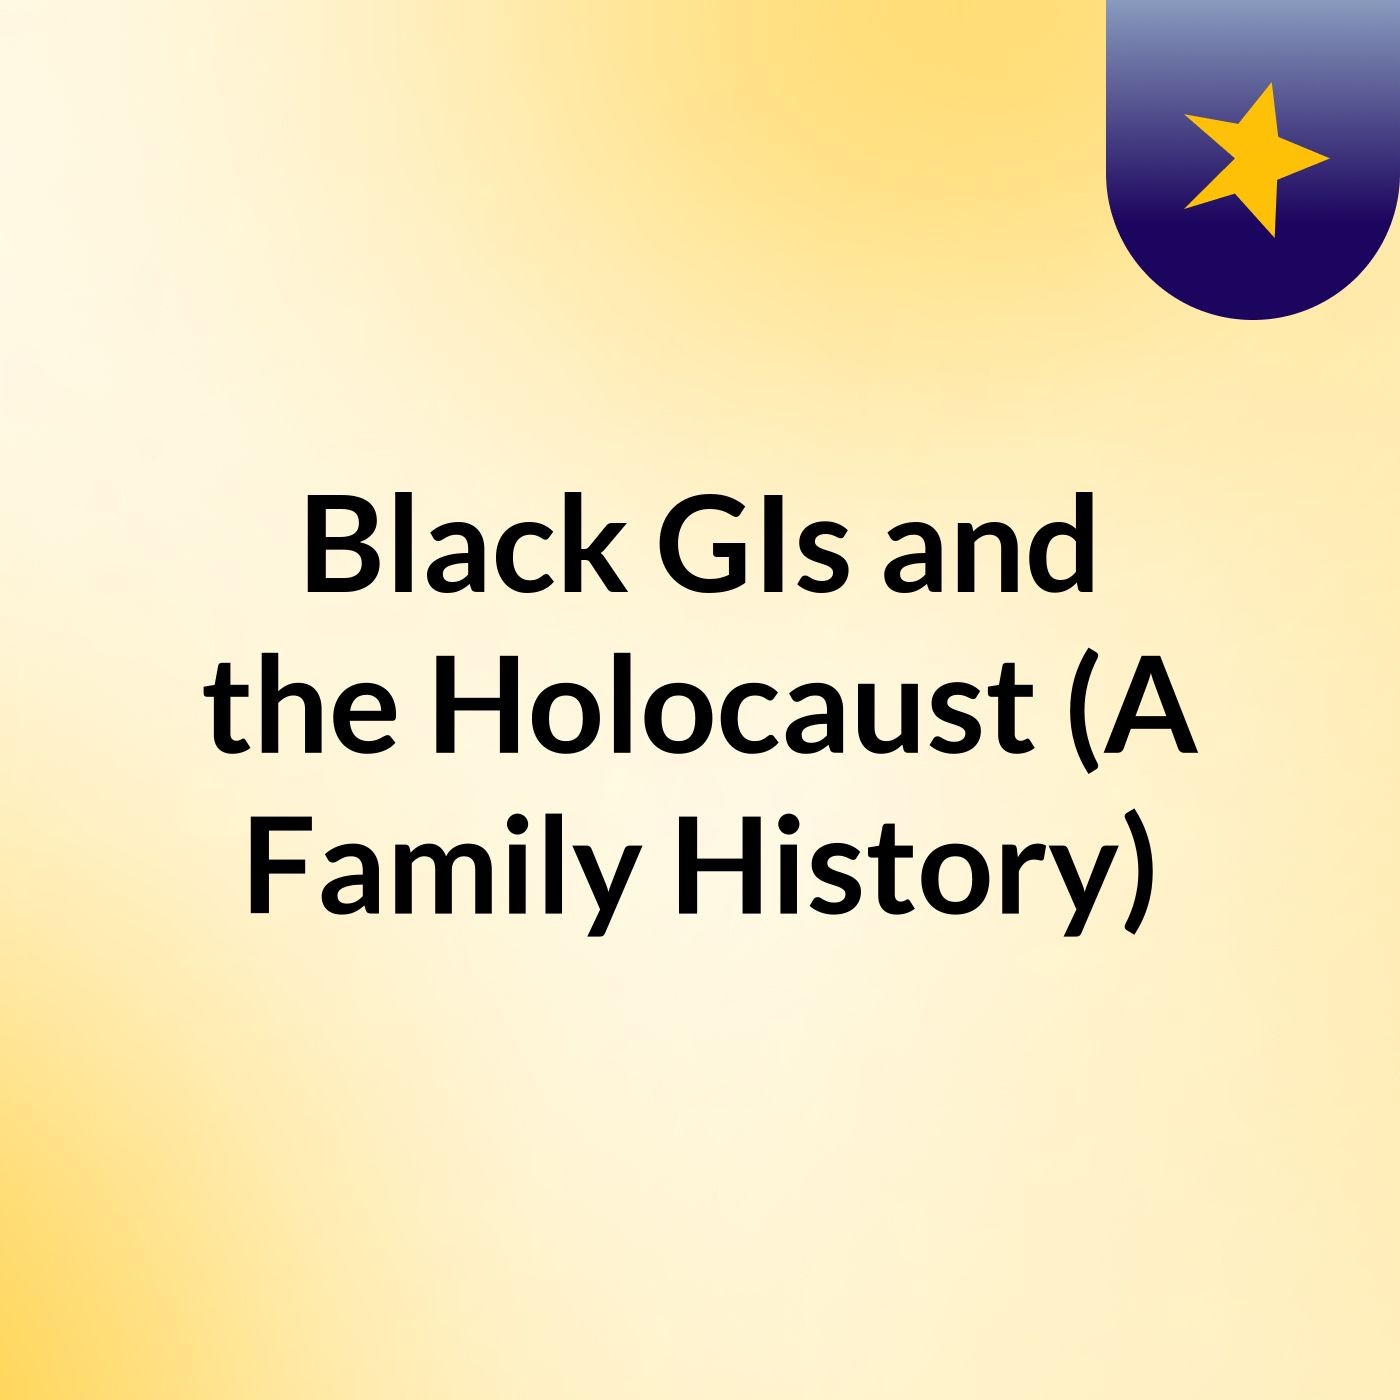 Black GIs and the Holocaust (A Family History)